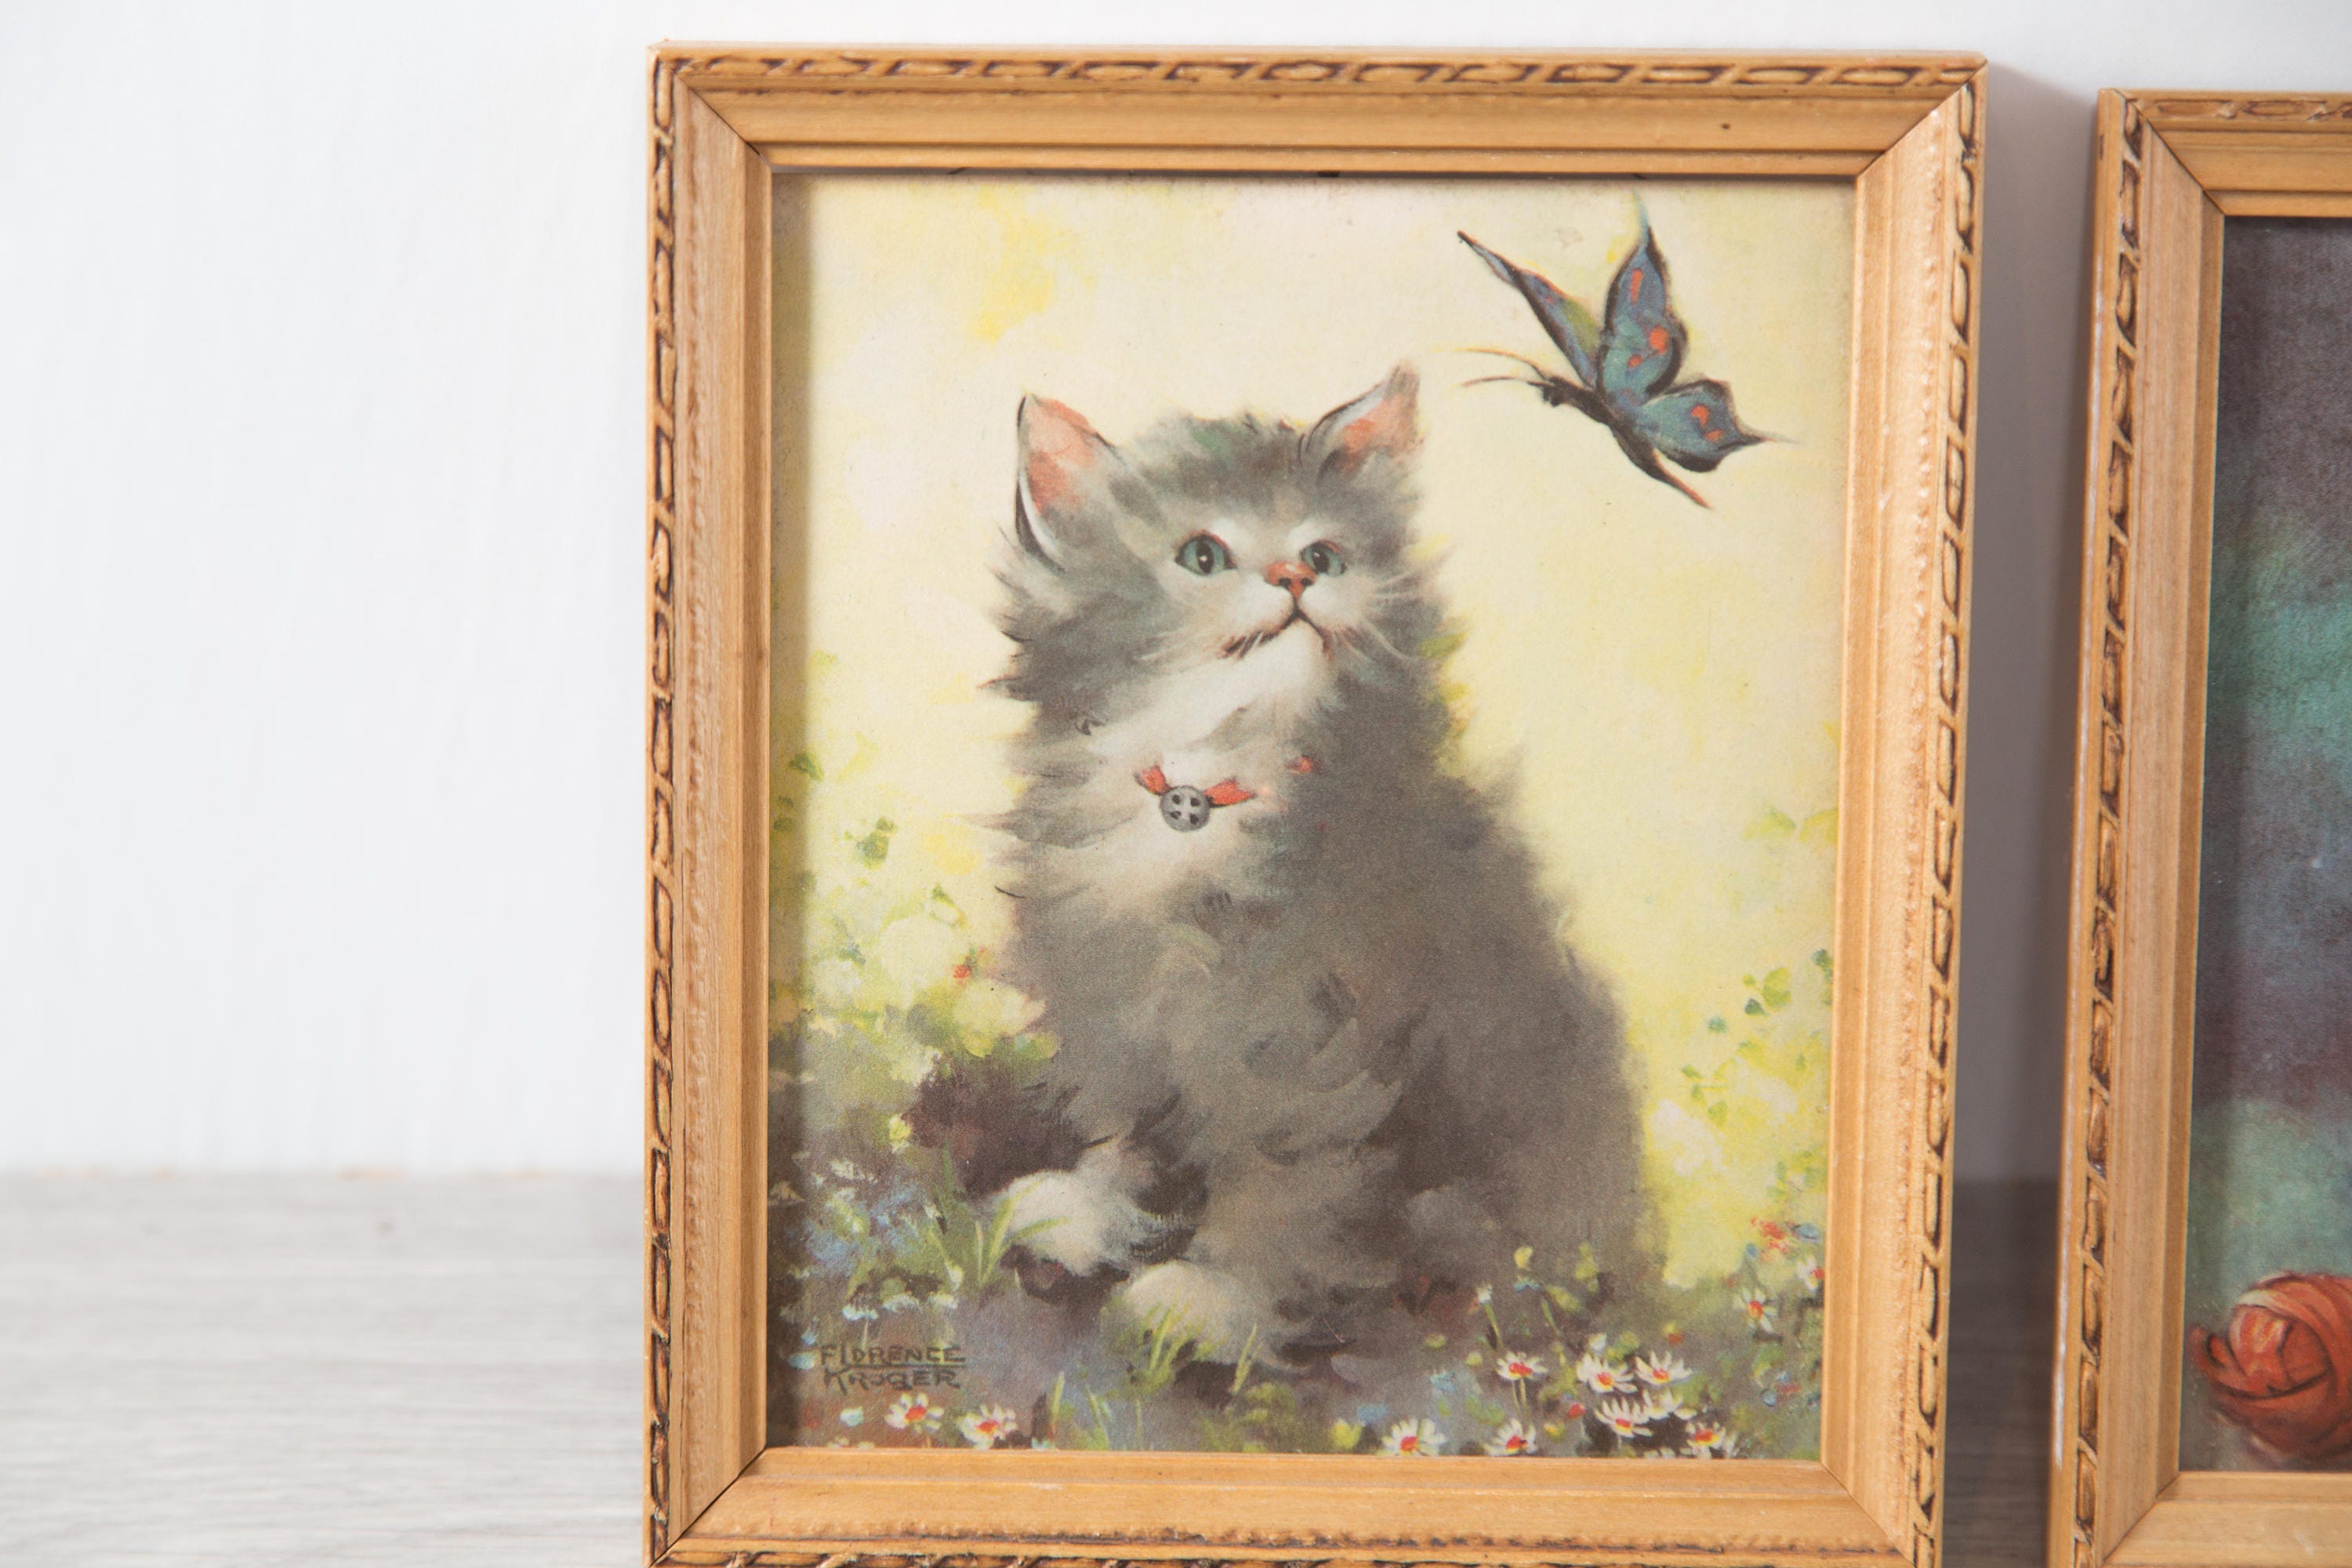 Vintage Cat Prints / Small Framed Rustic Lithographs of Sitting Kittens ...
